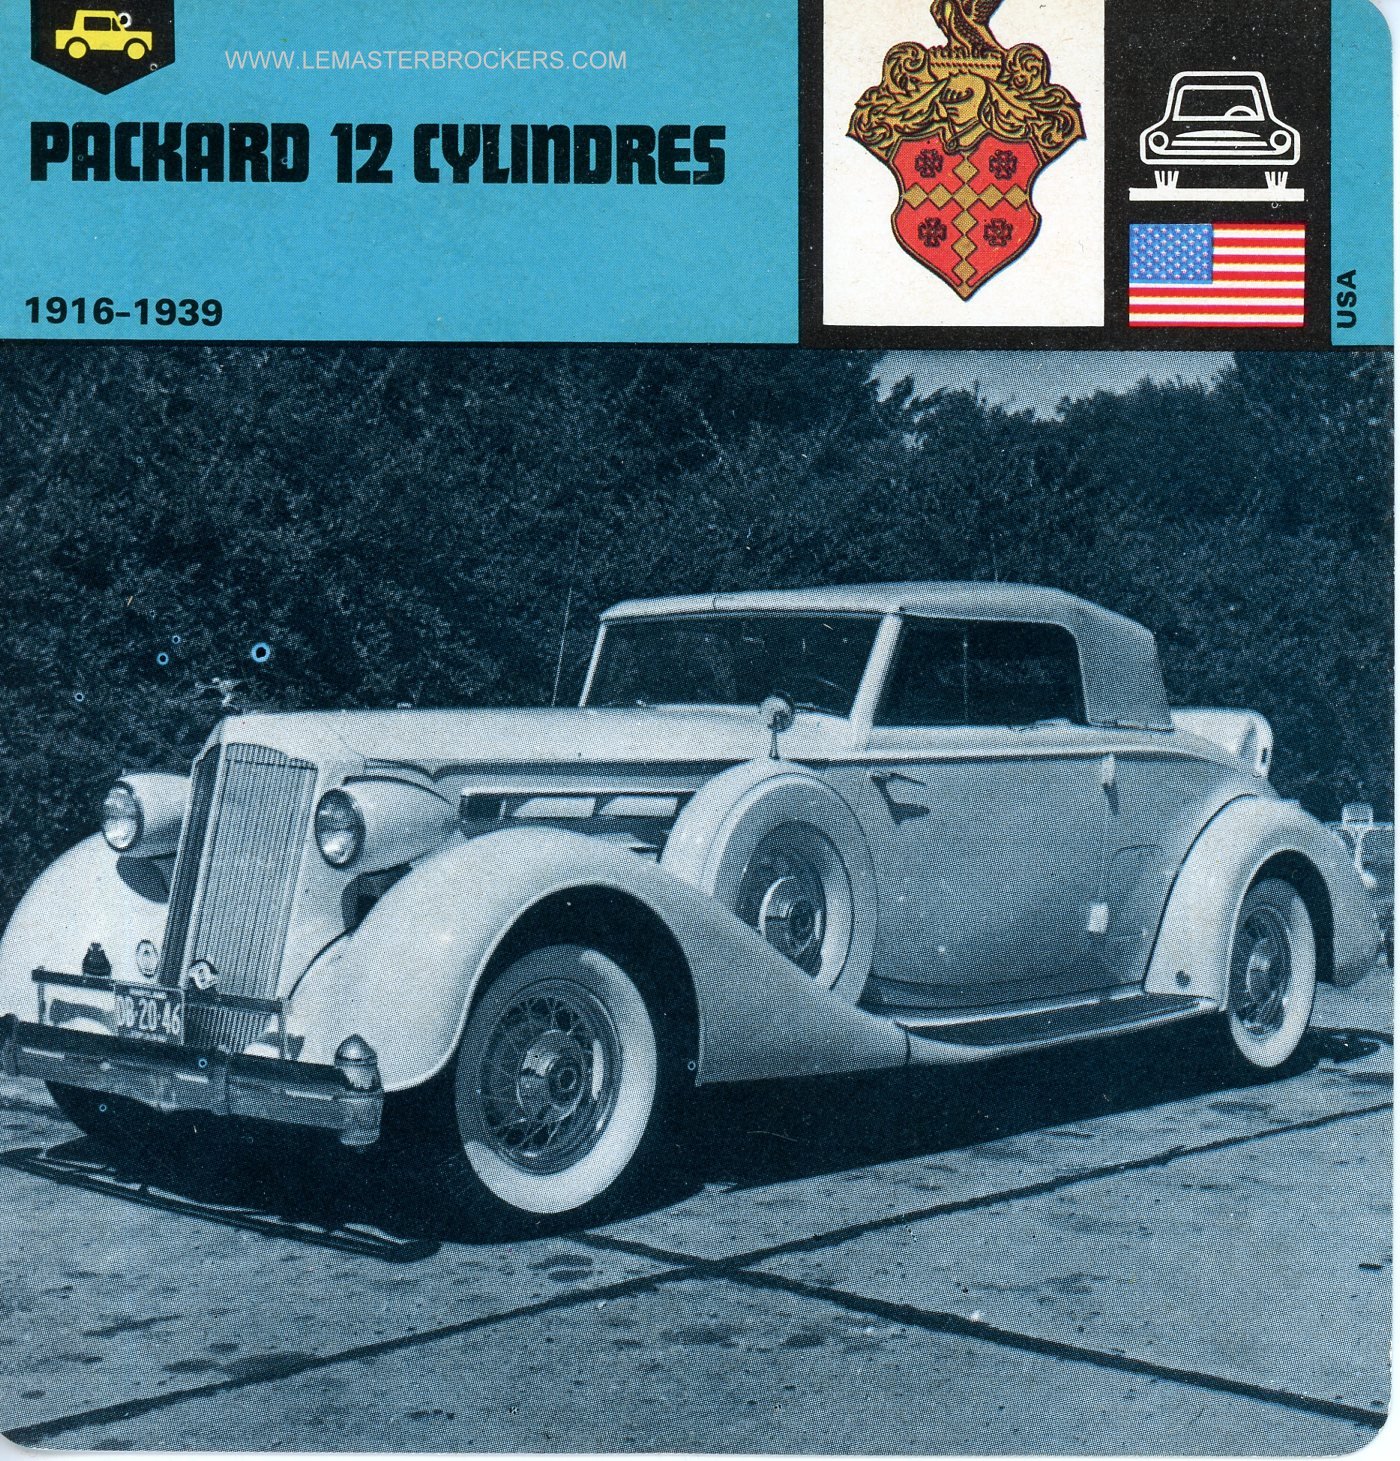 CARS-CARD-FICHE PACKARD 12 CYLINDRES 1916-1939